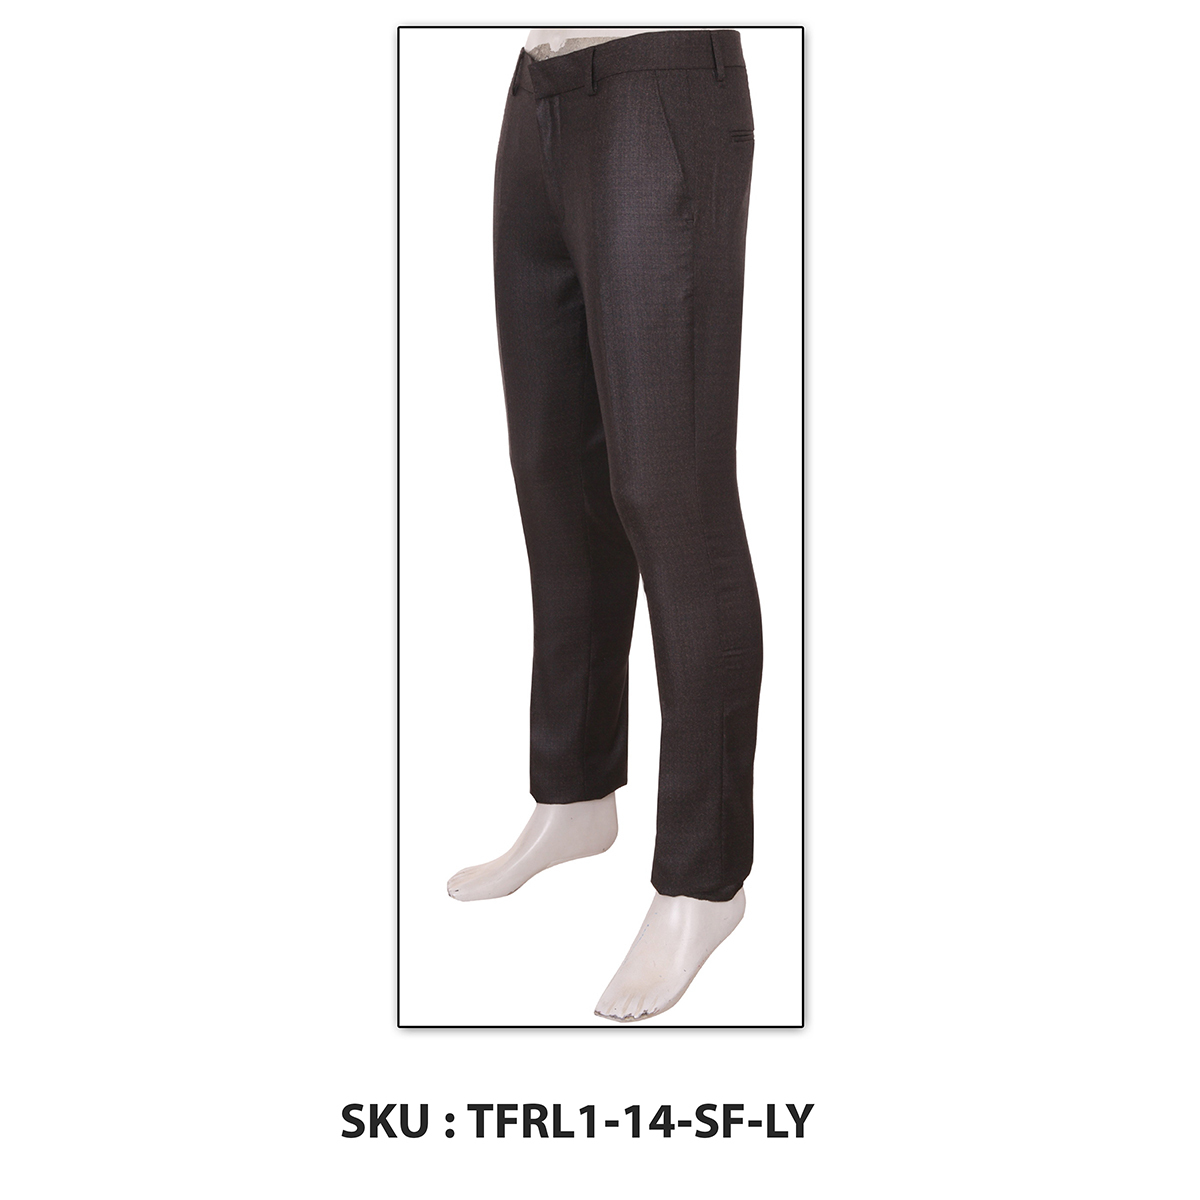 Classic Polo Mens Trousers Tfrl1-14-Sf-Ly Brown 38